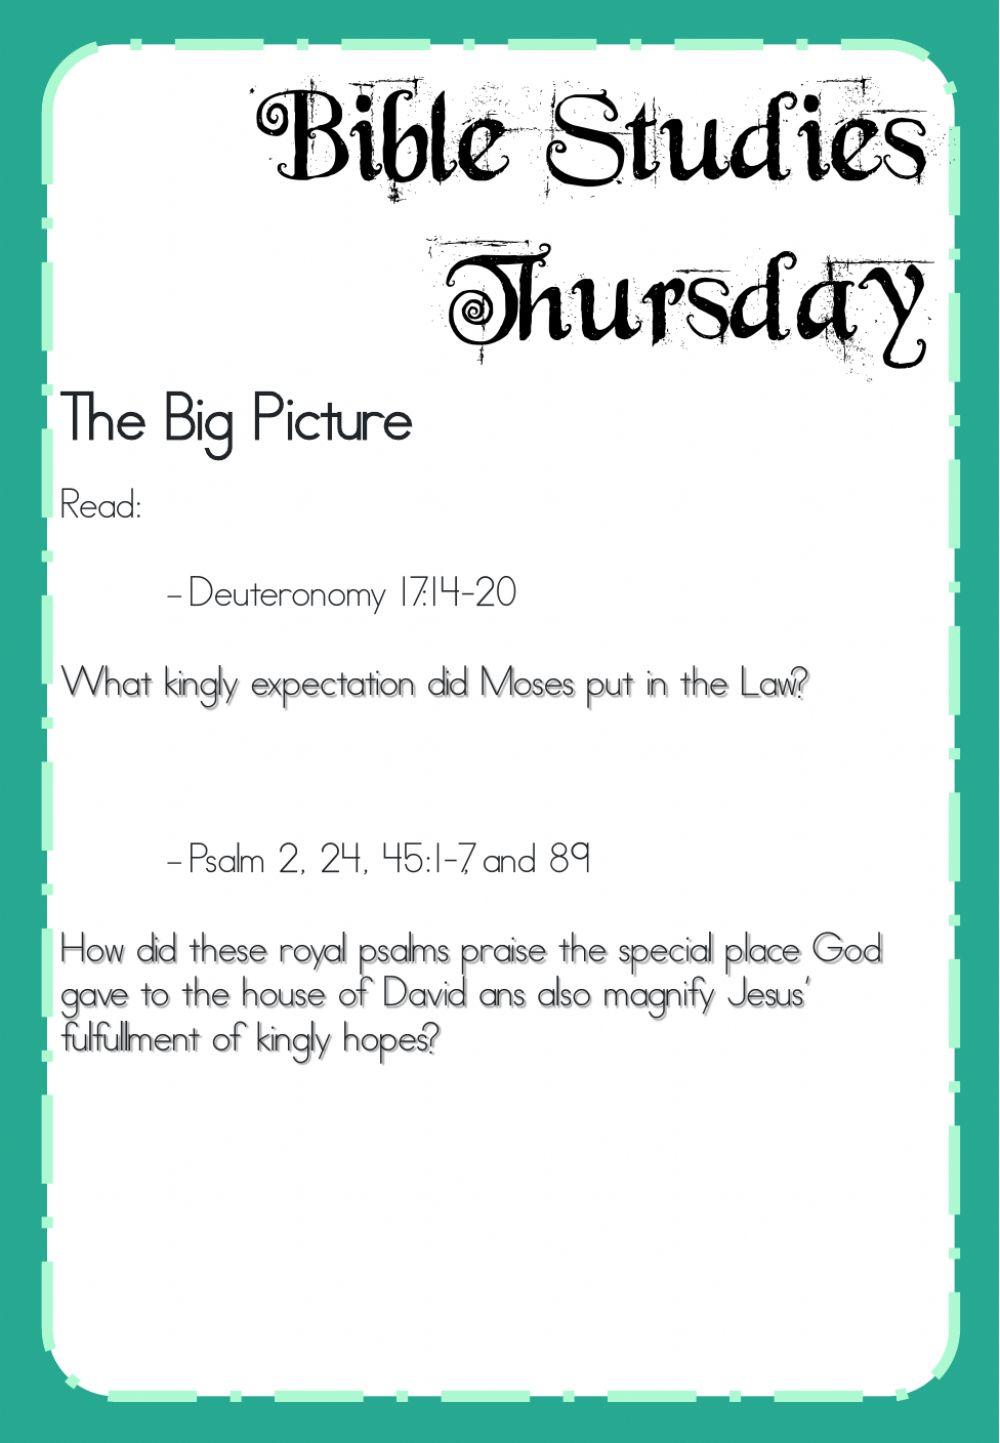 Bible The Big Picture A W15 Thursday